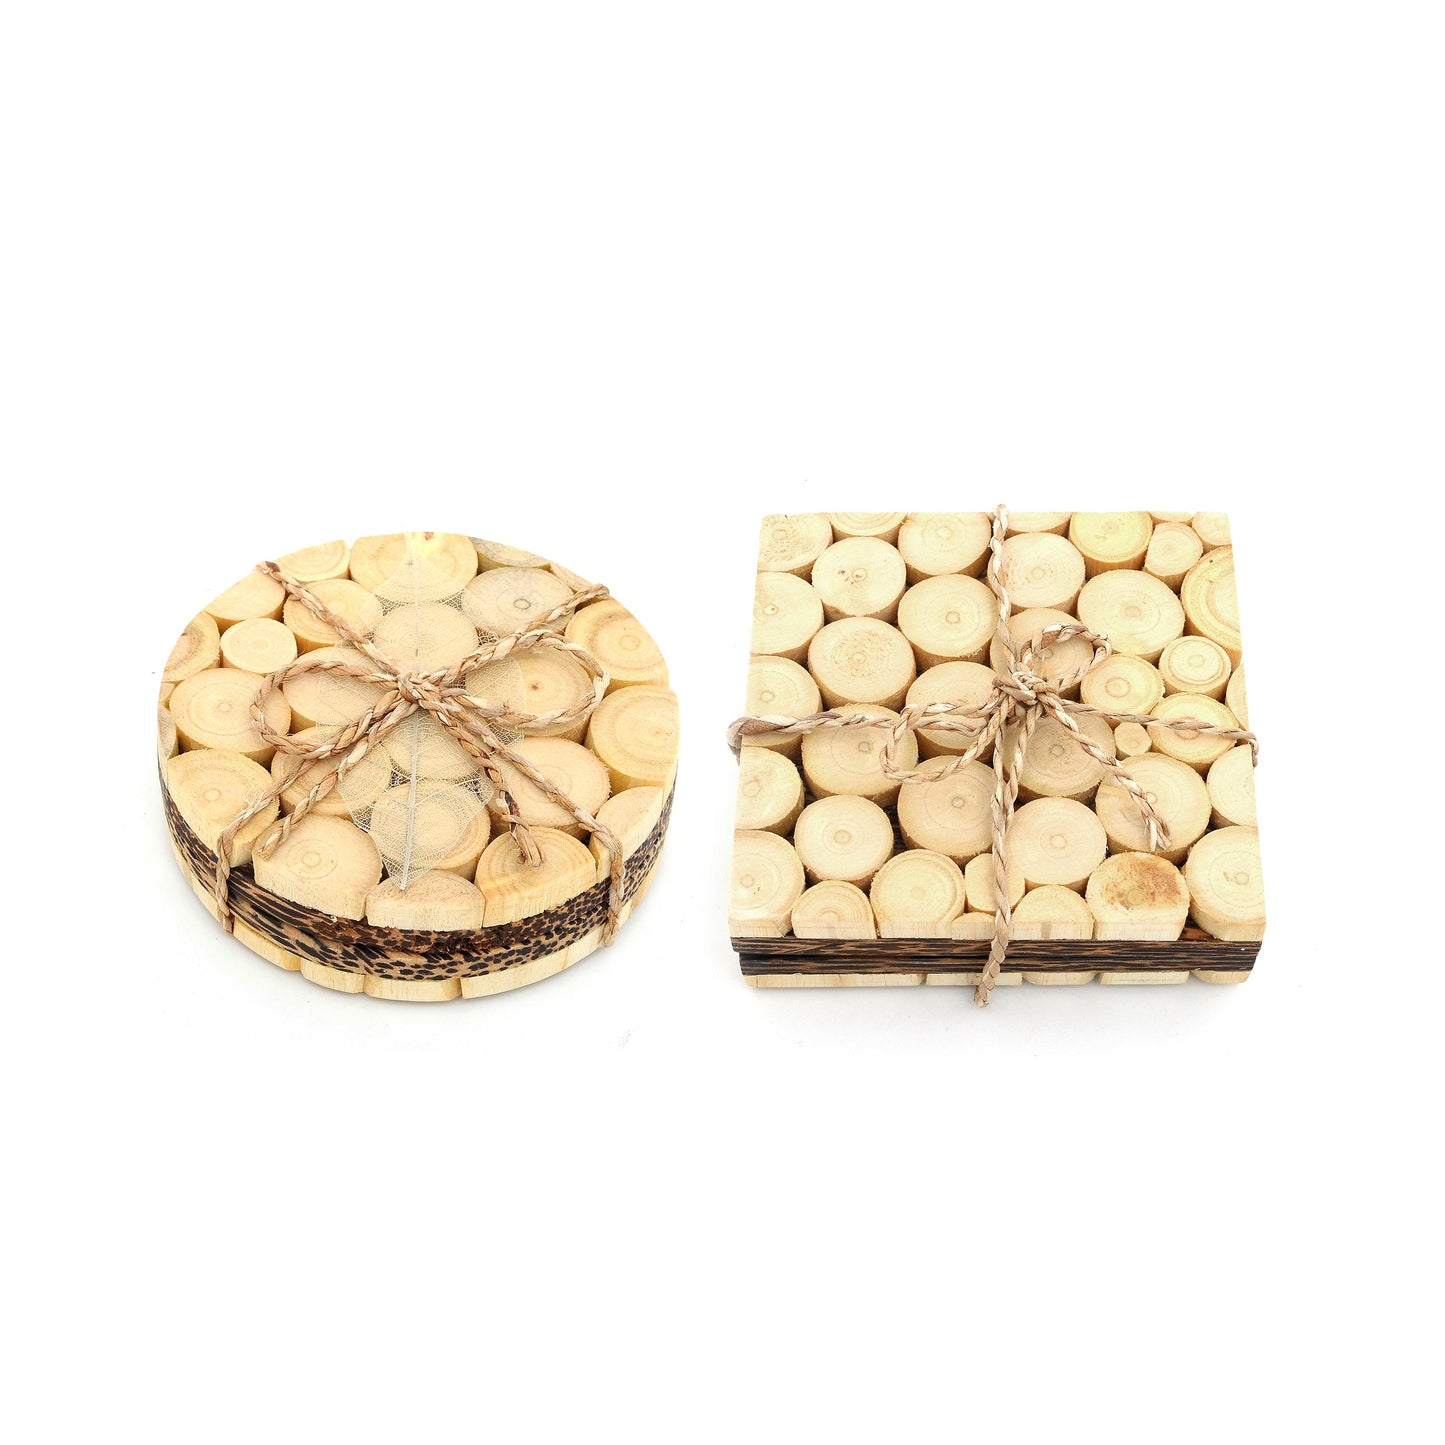 Set of 2 Myanmar Handcrafted Unique Modern Wooden Coaster With Coconut Wood